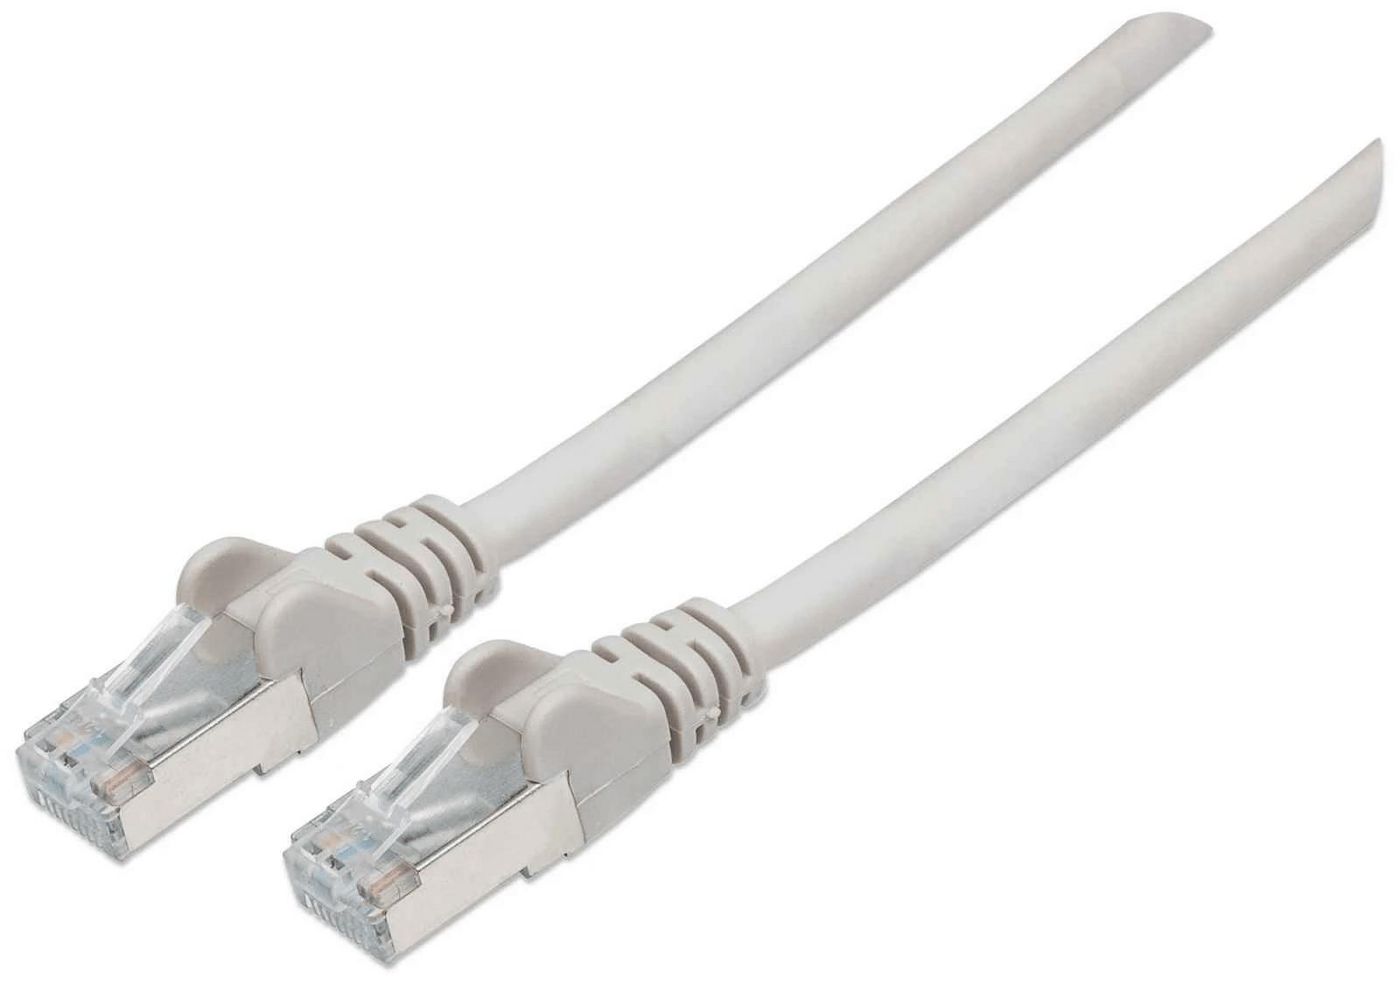 Intellinet 740678 High Performance Network Cable 